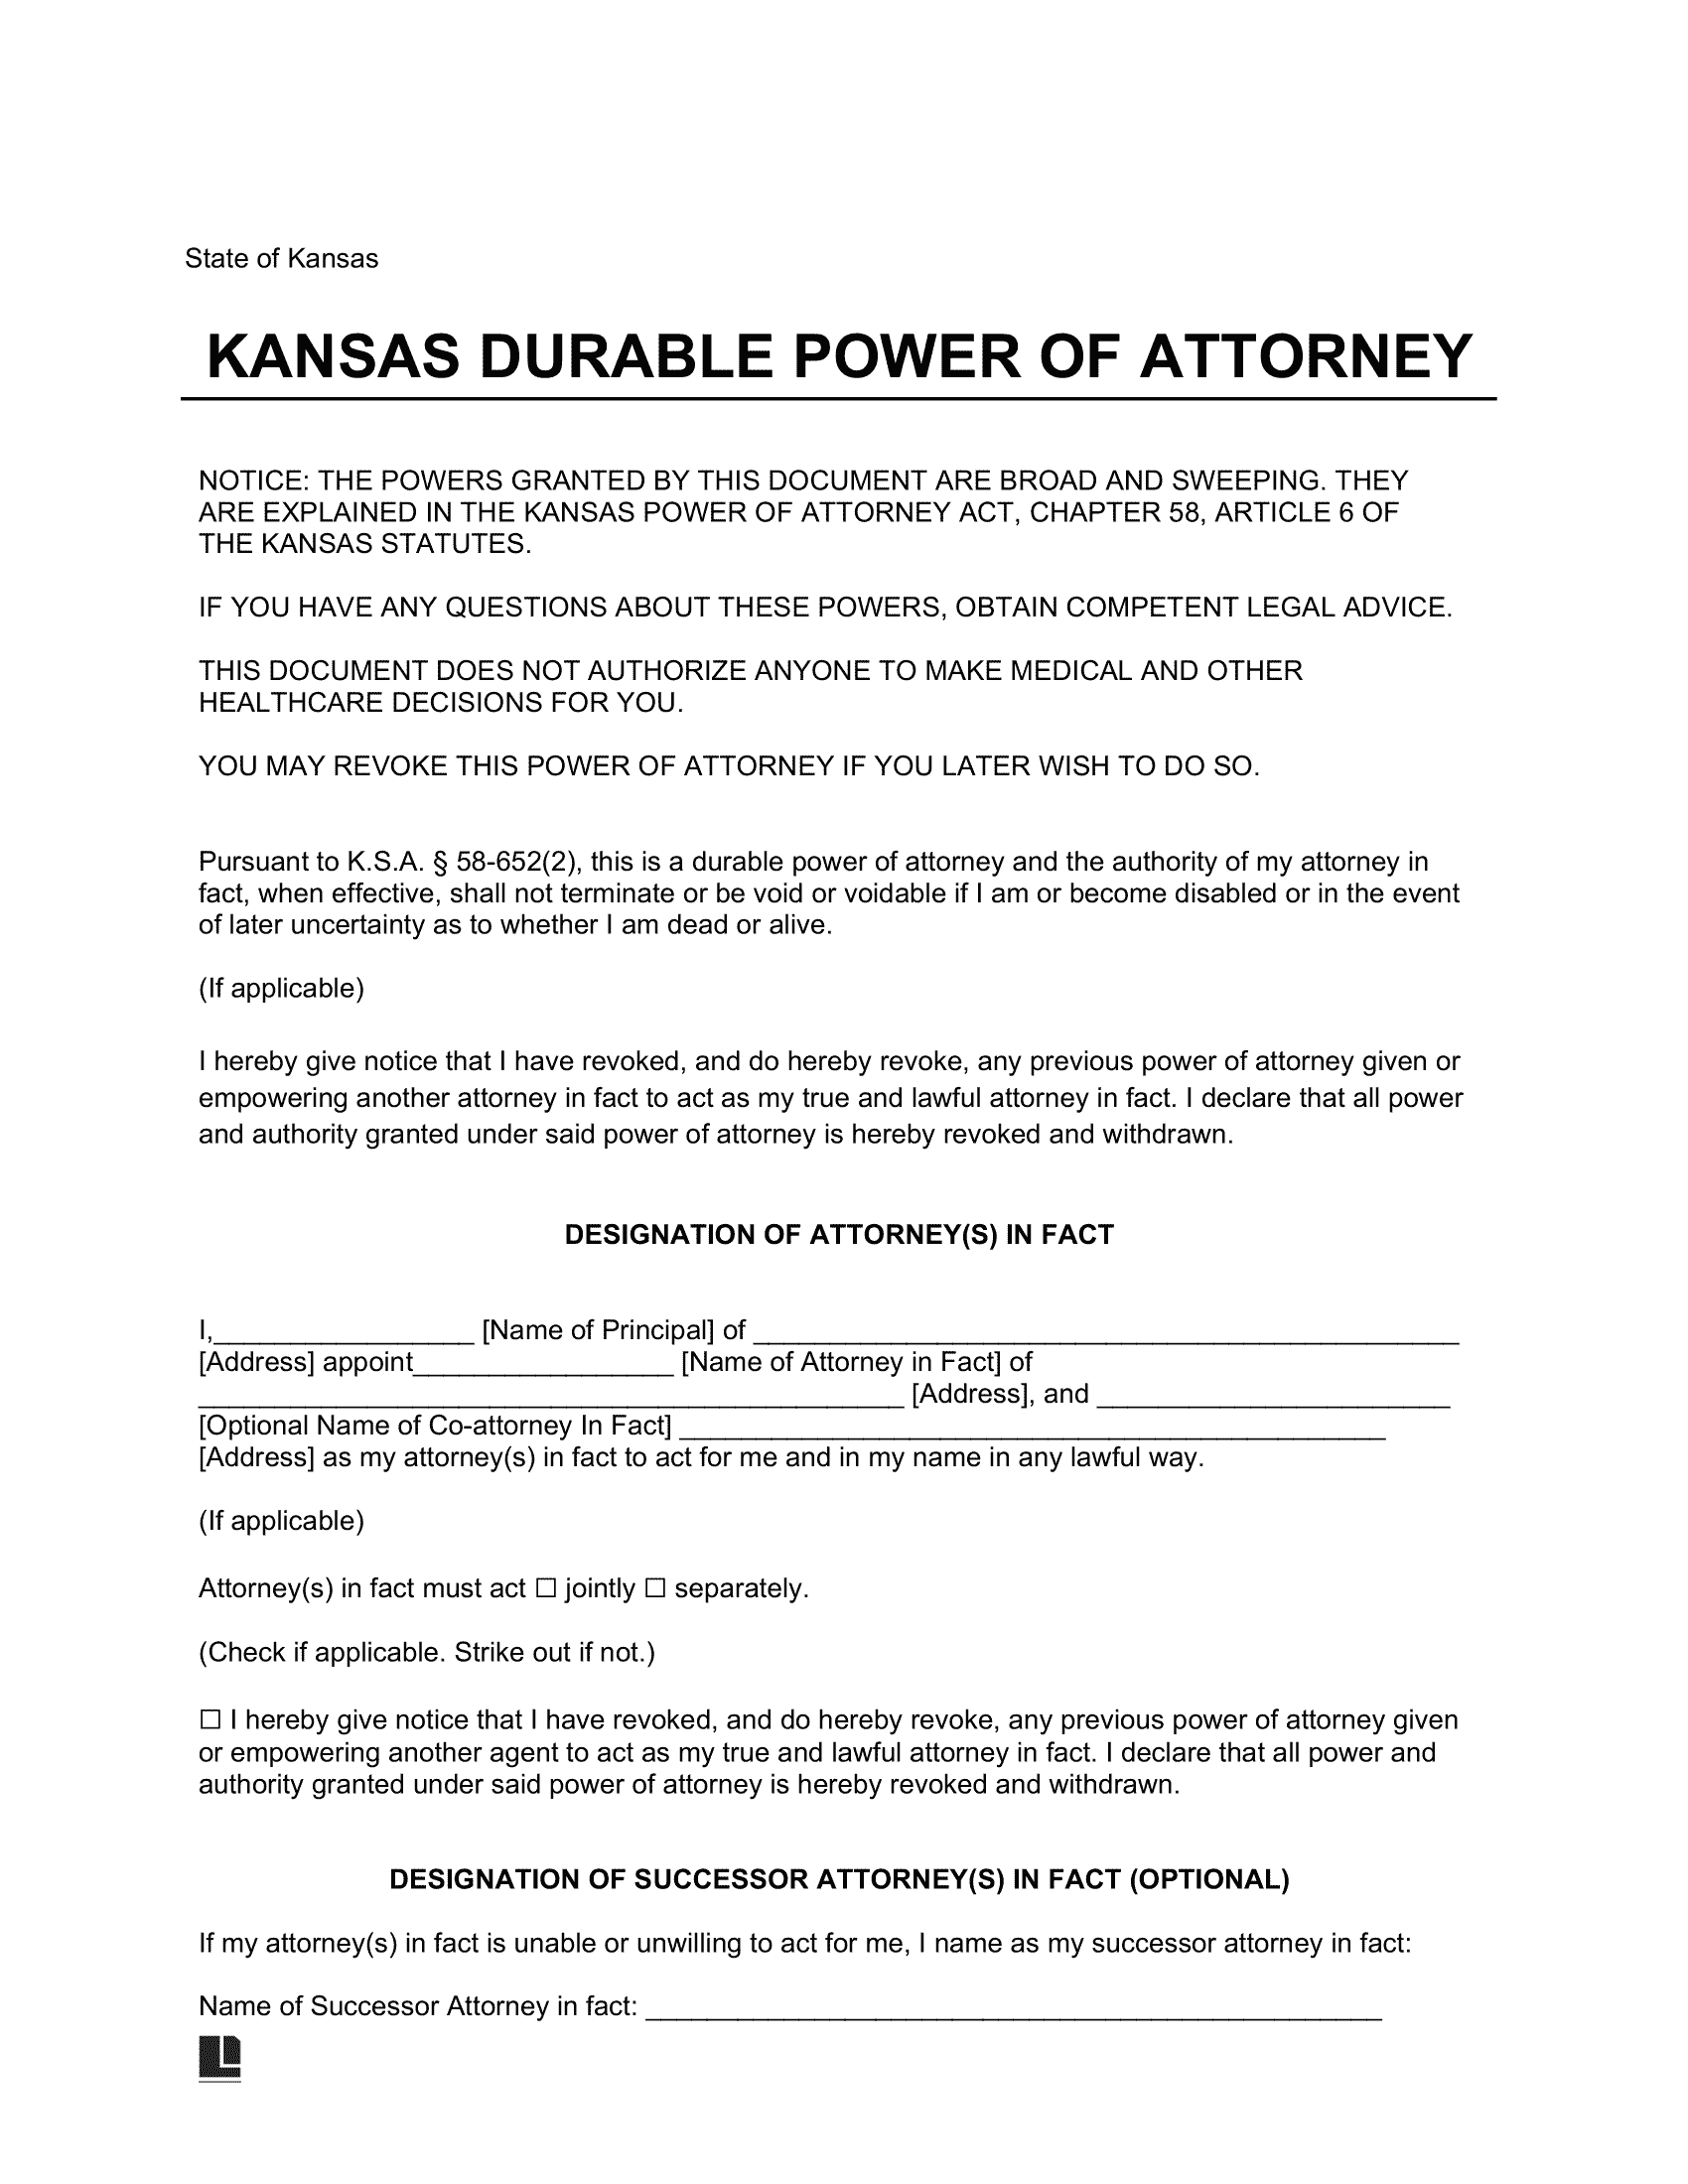 Kansas Durable Power of Attorney Template